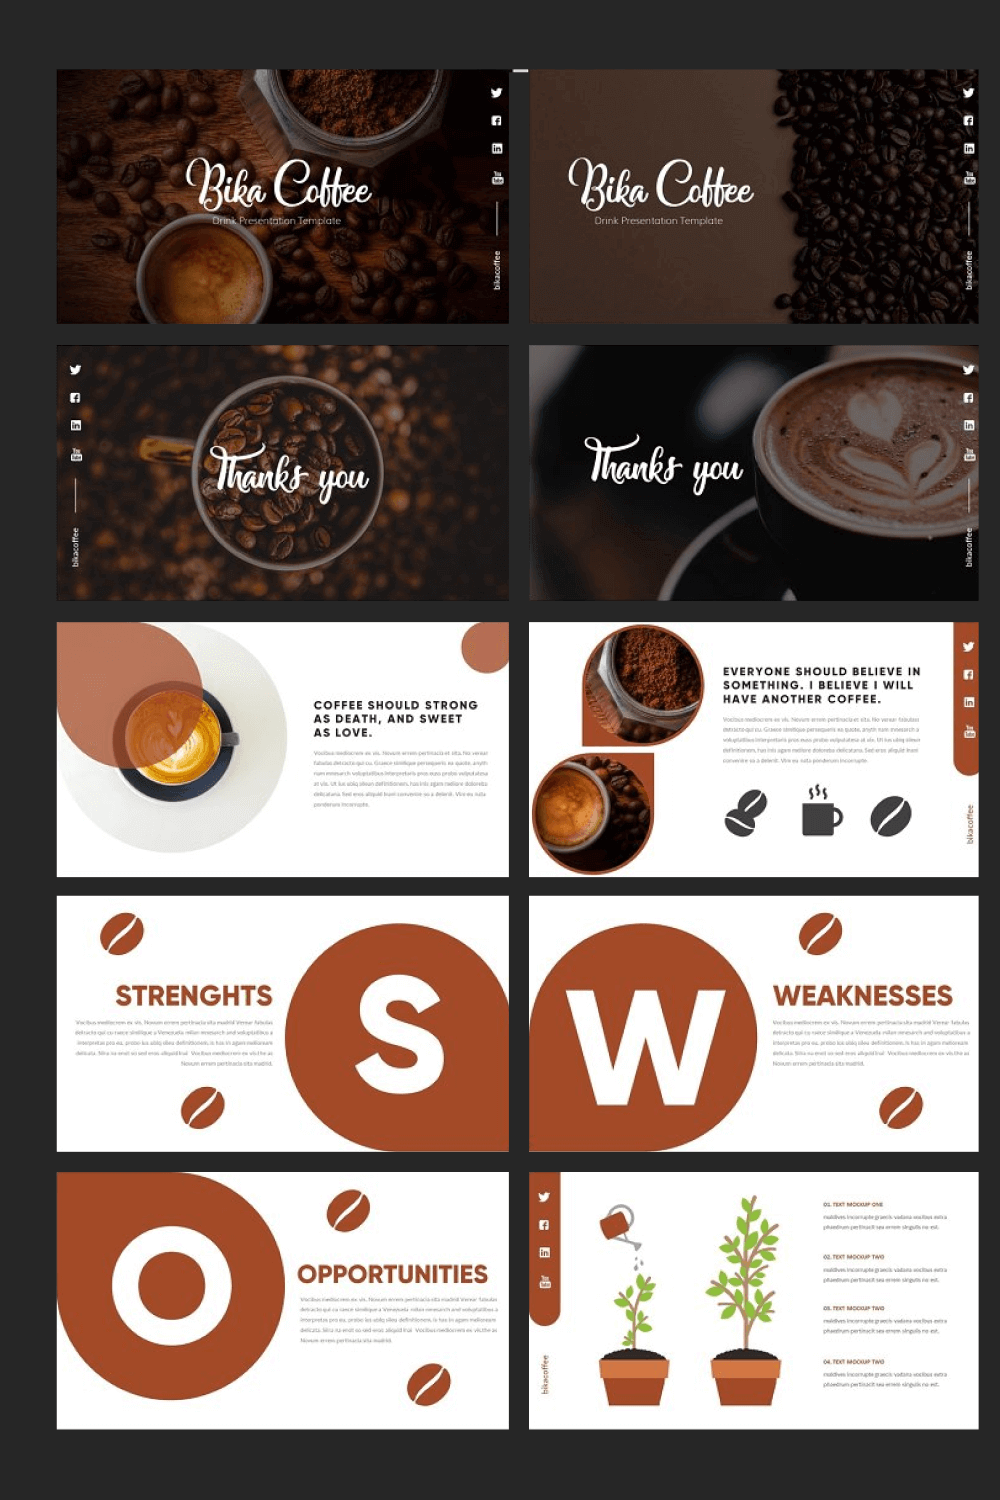 Strenghts, Weaknesses and Opportunities of Bika Coffee.